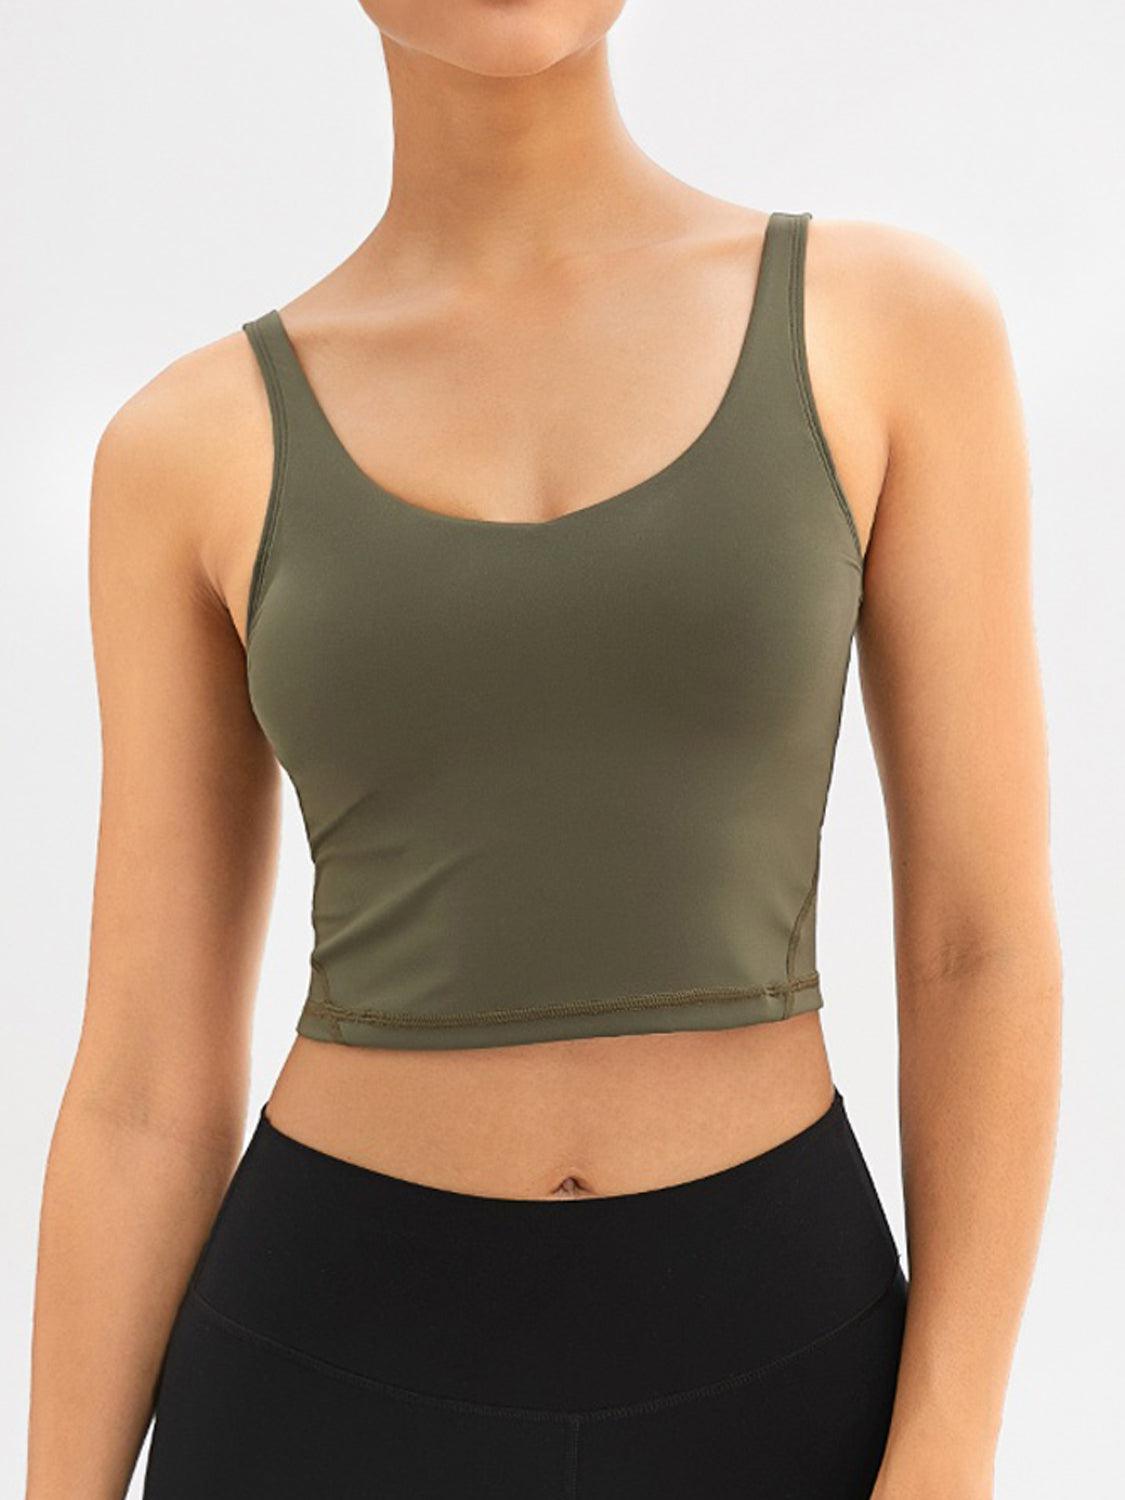 a woman wearing a green crop top and black leggings